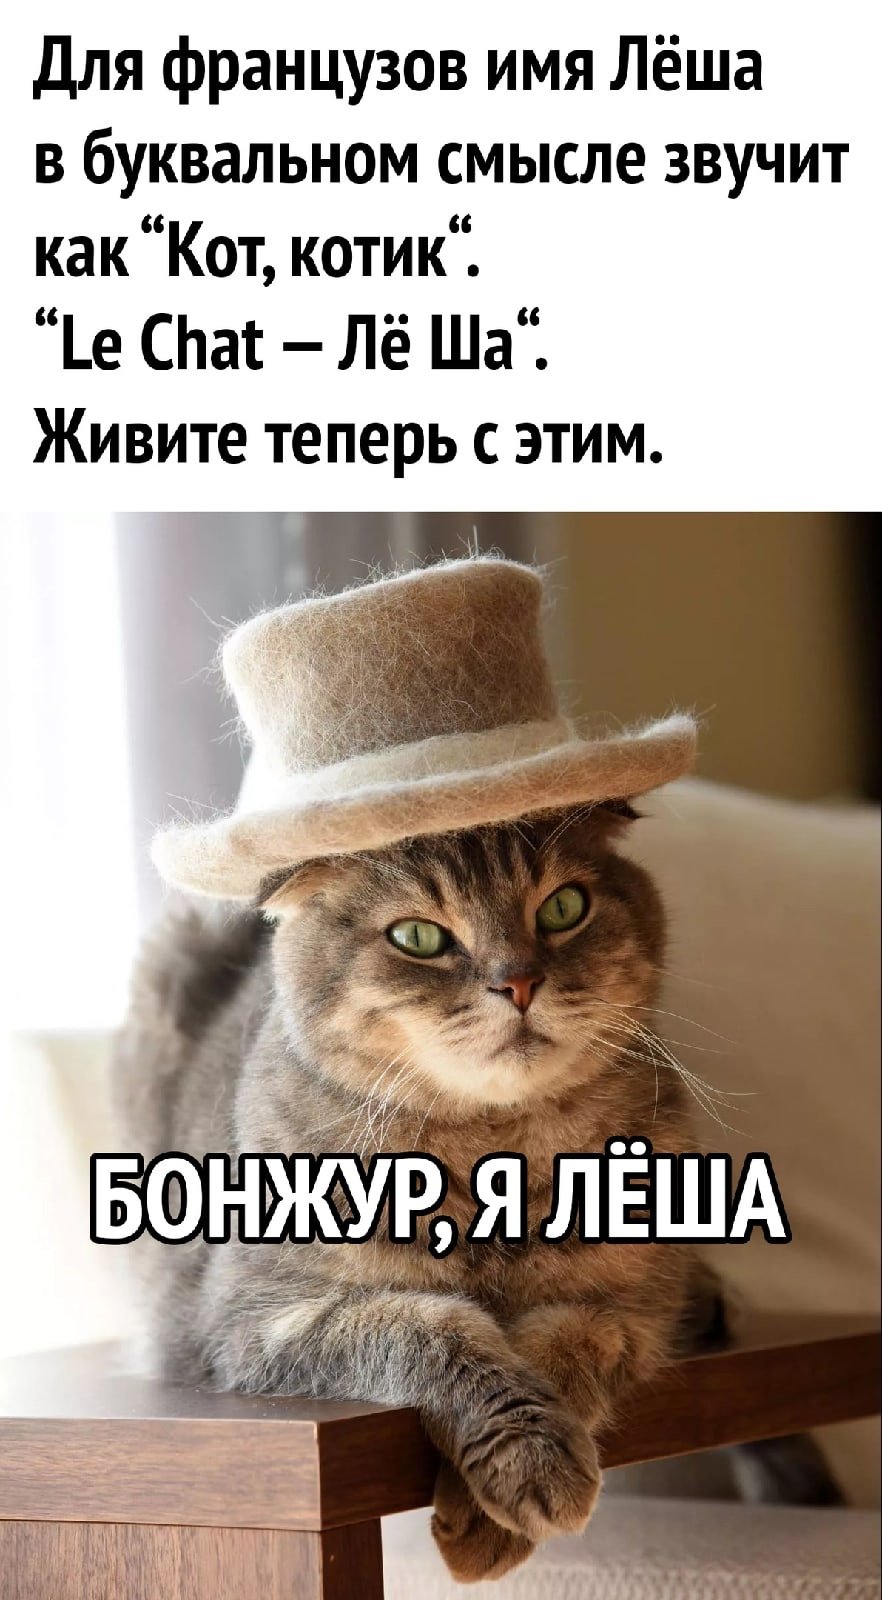 Le chat лёша